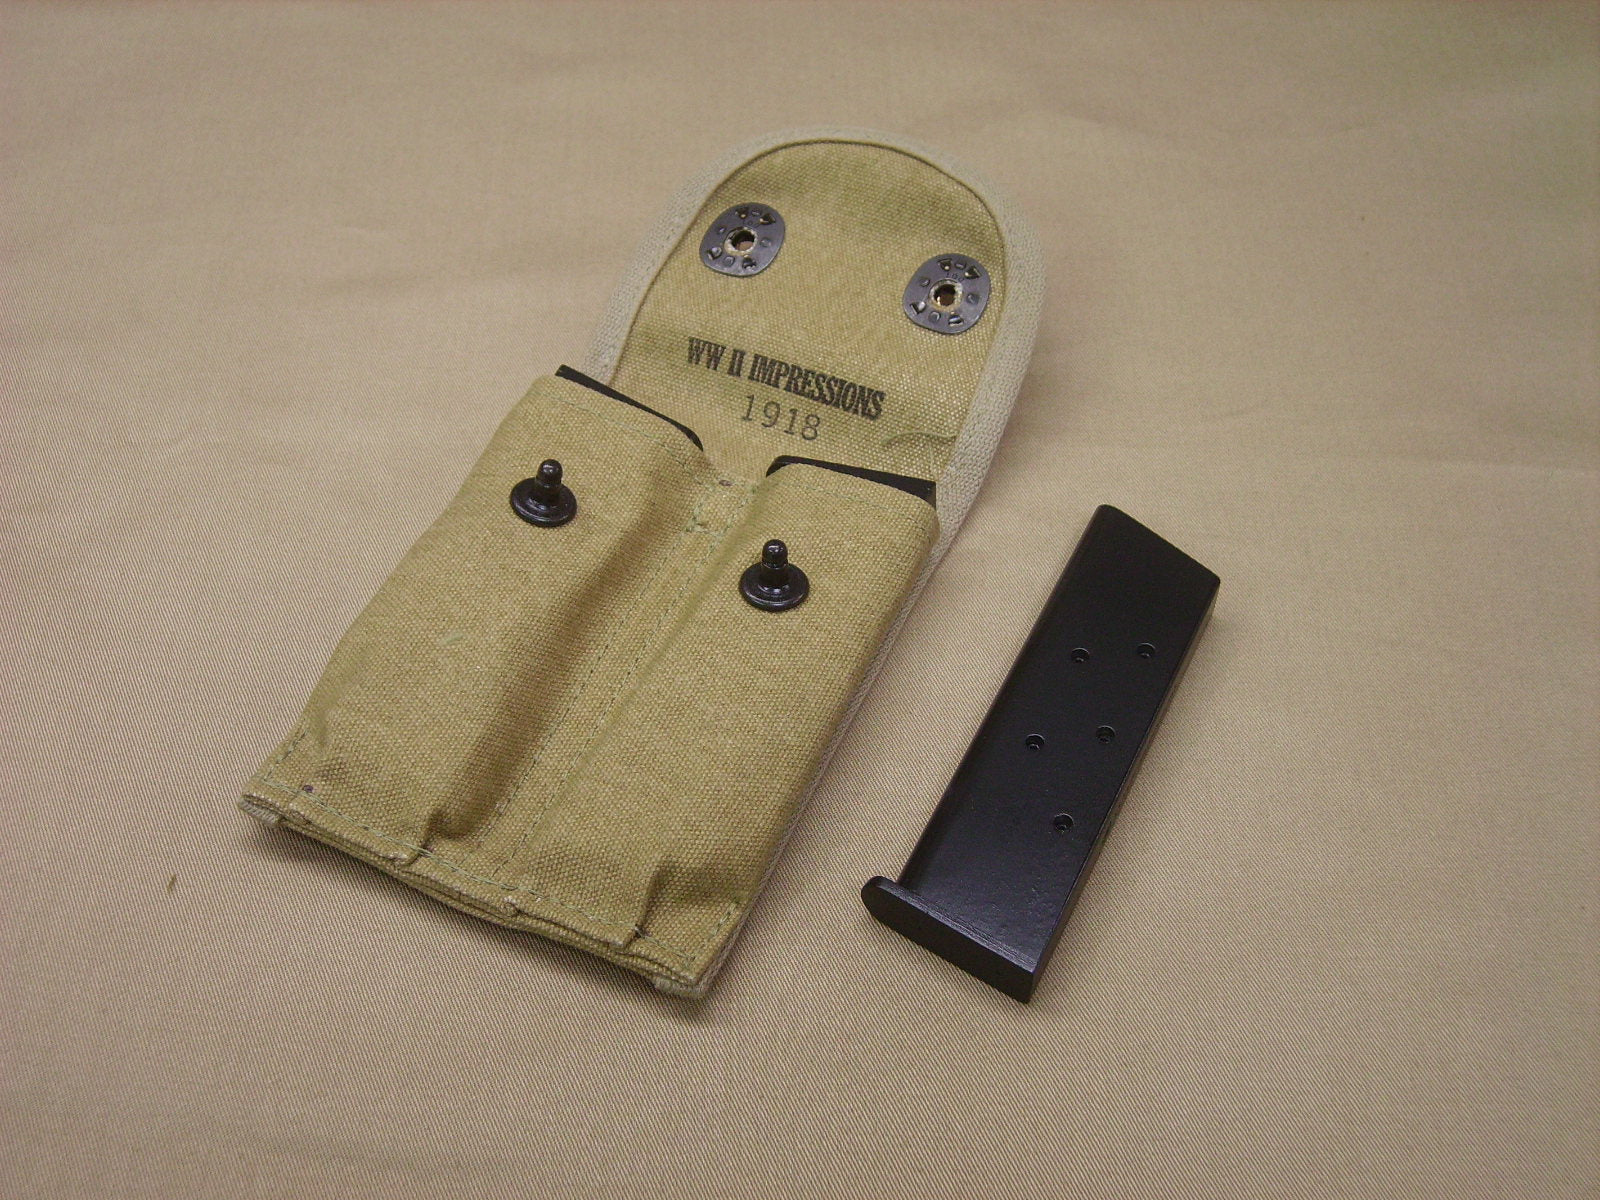 Pocket, Magazine, Double-Web, EM, 45 ACP, M1918 CLOSEOUT sold as-is. All sales final.